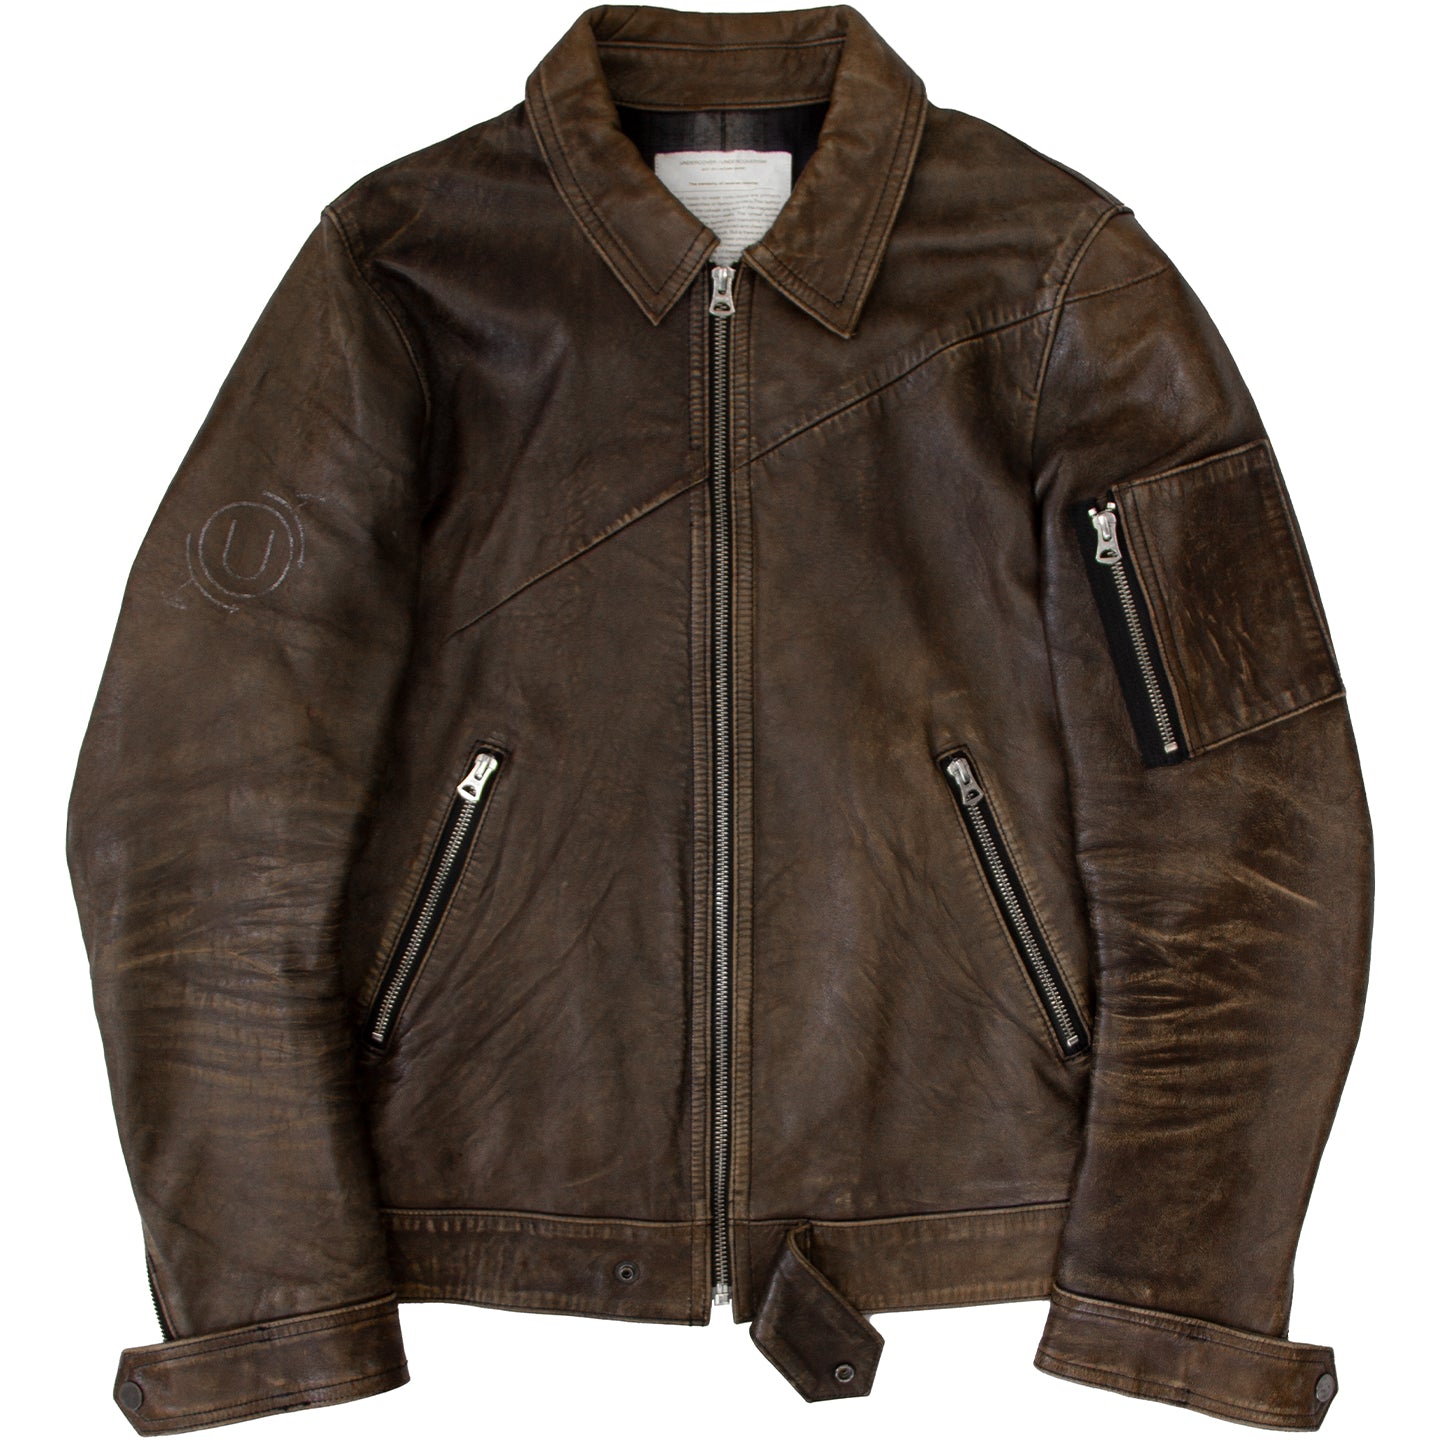 AW10 UNDERCOVER GIRA LEATHER JACKET